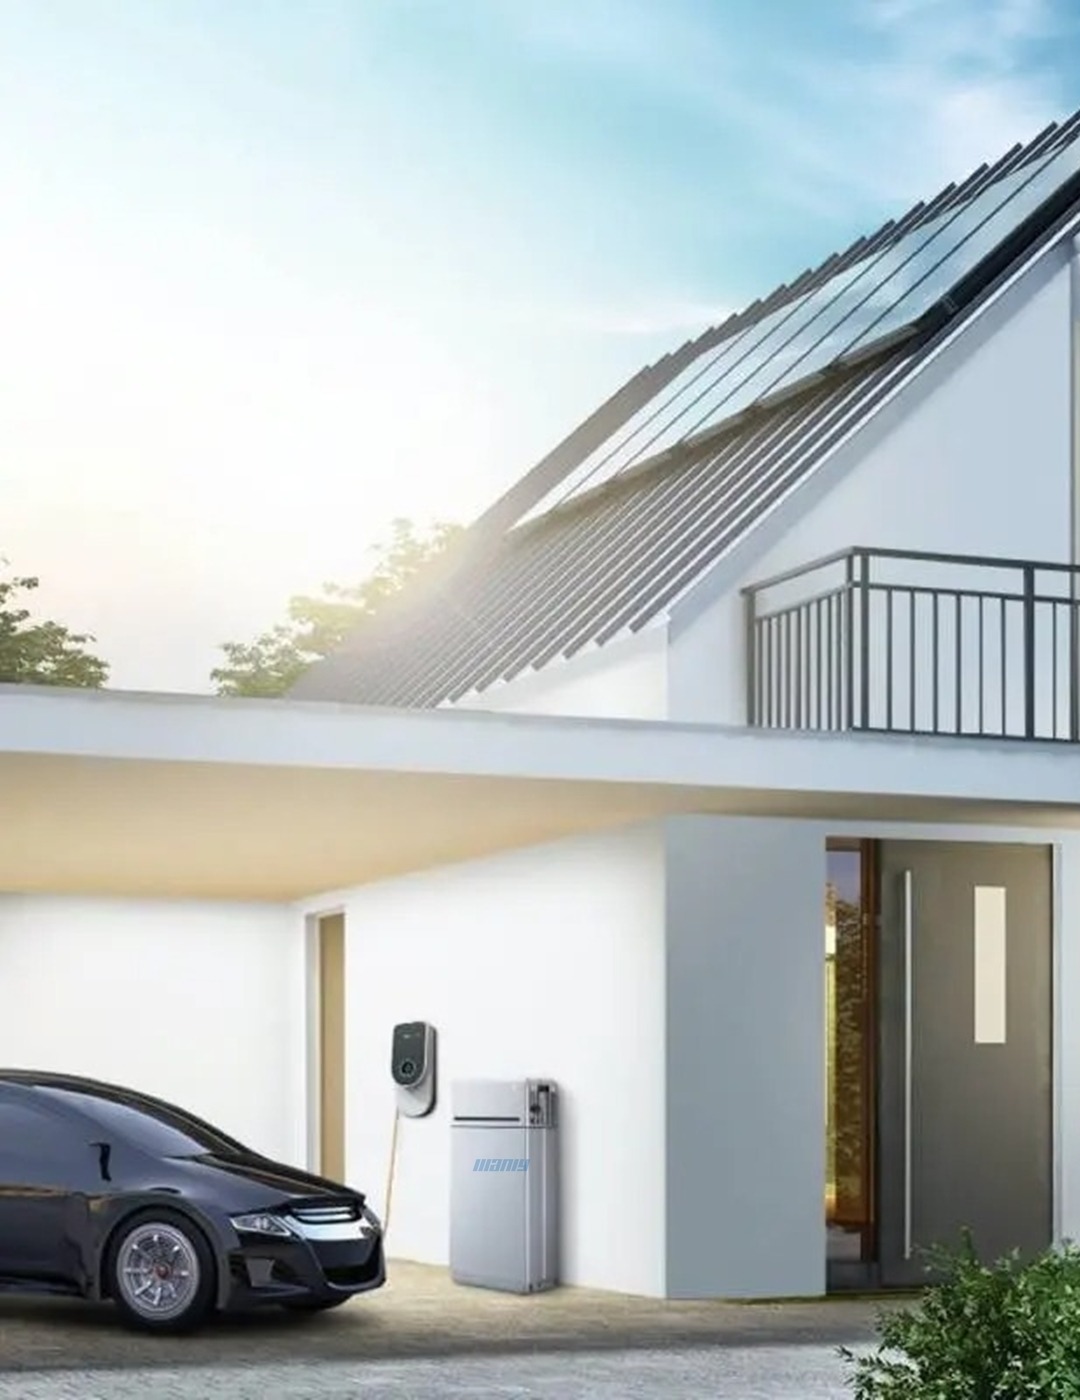 Residential energy storage system - manly